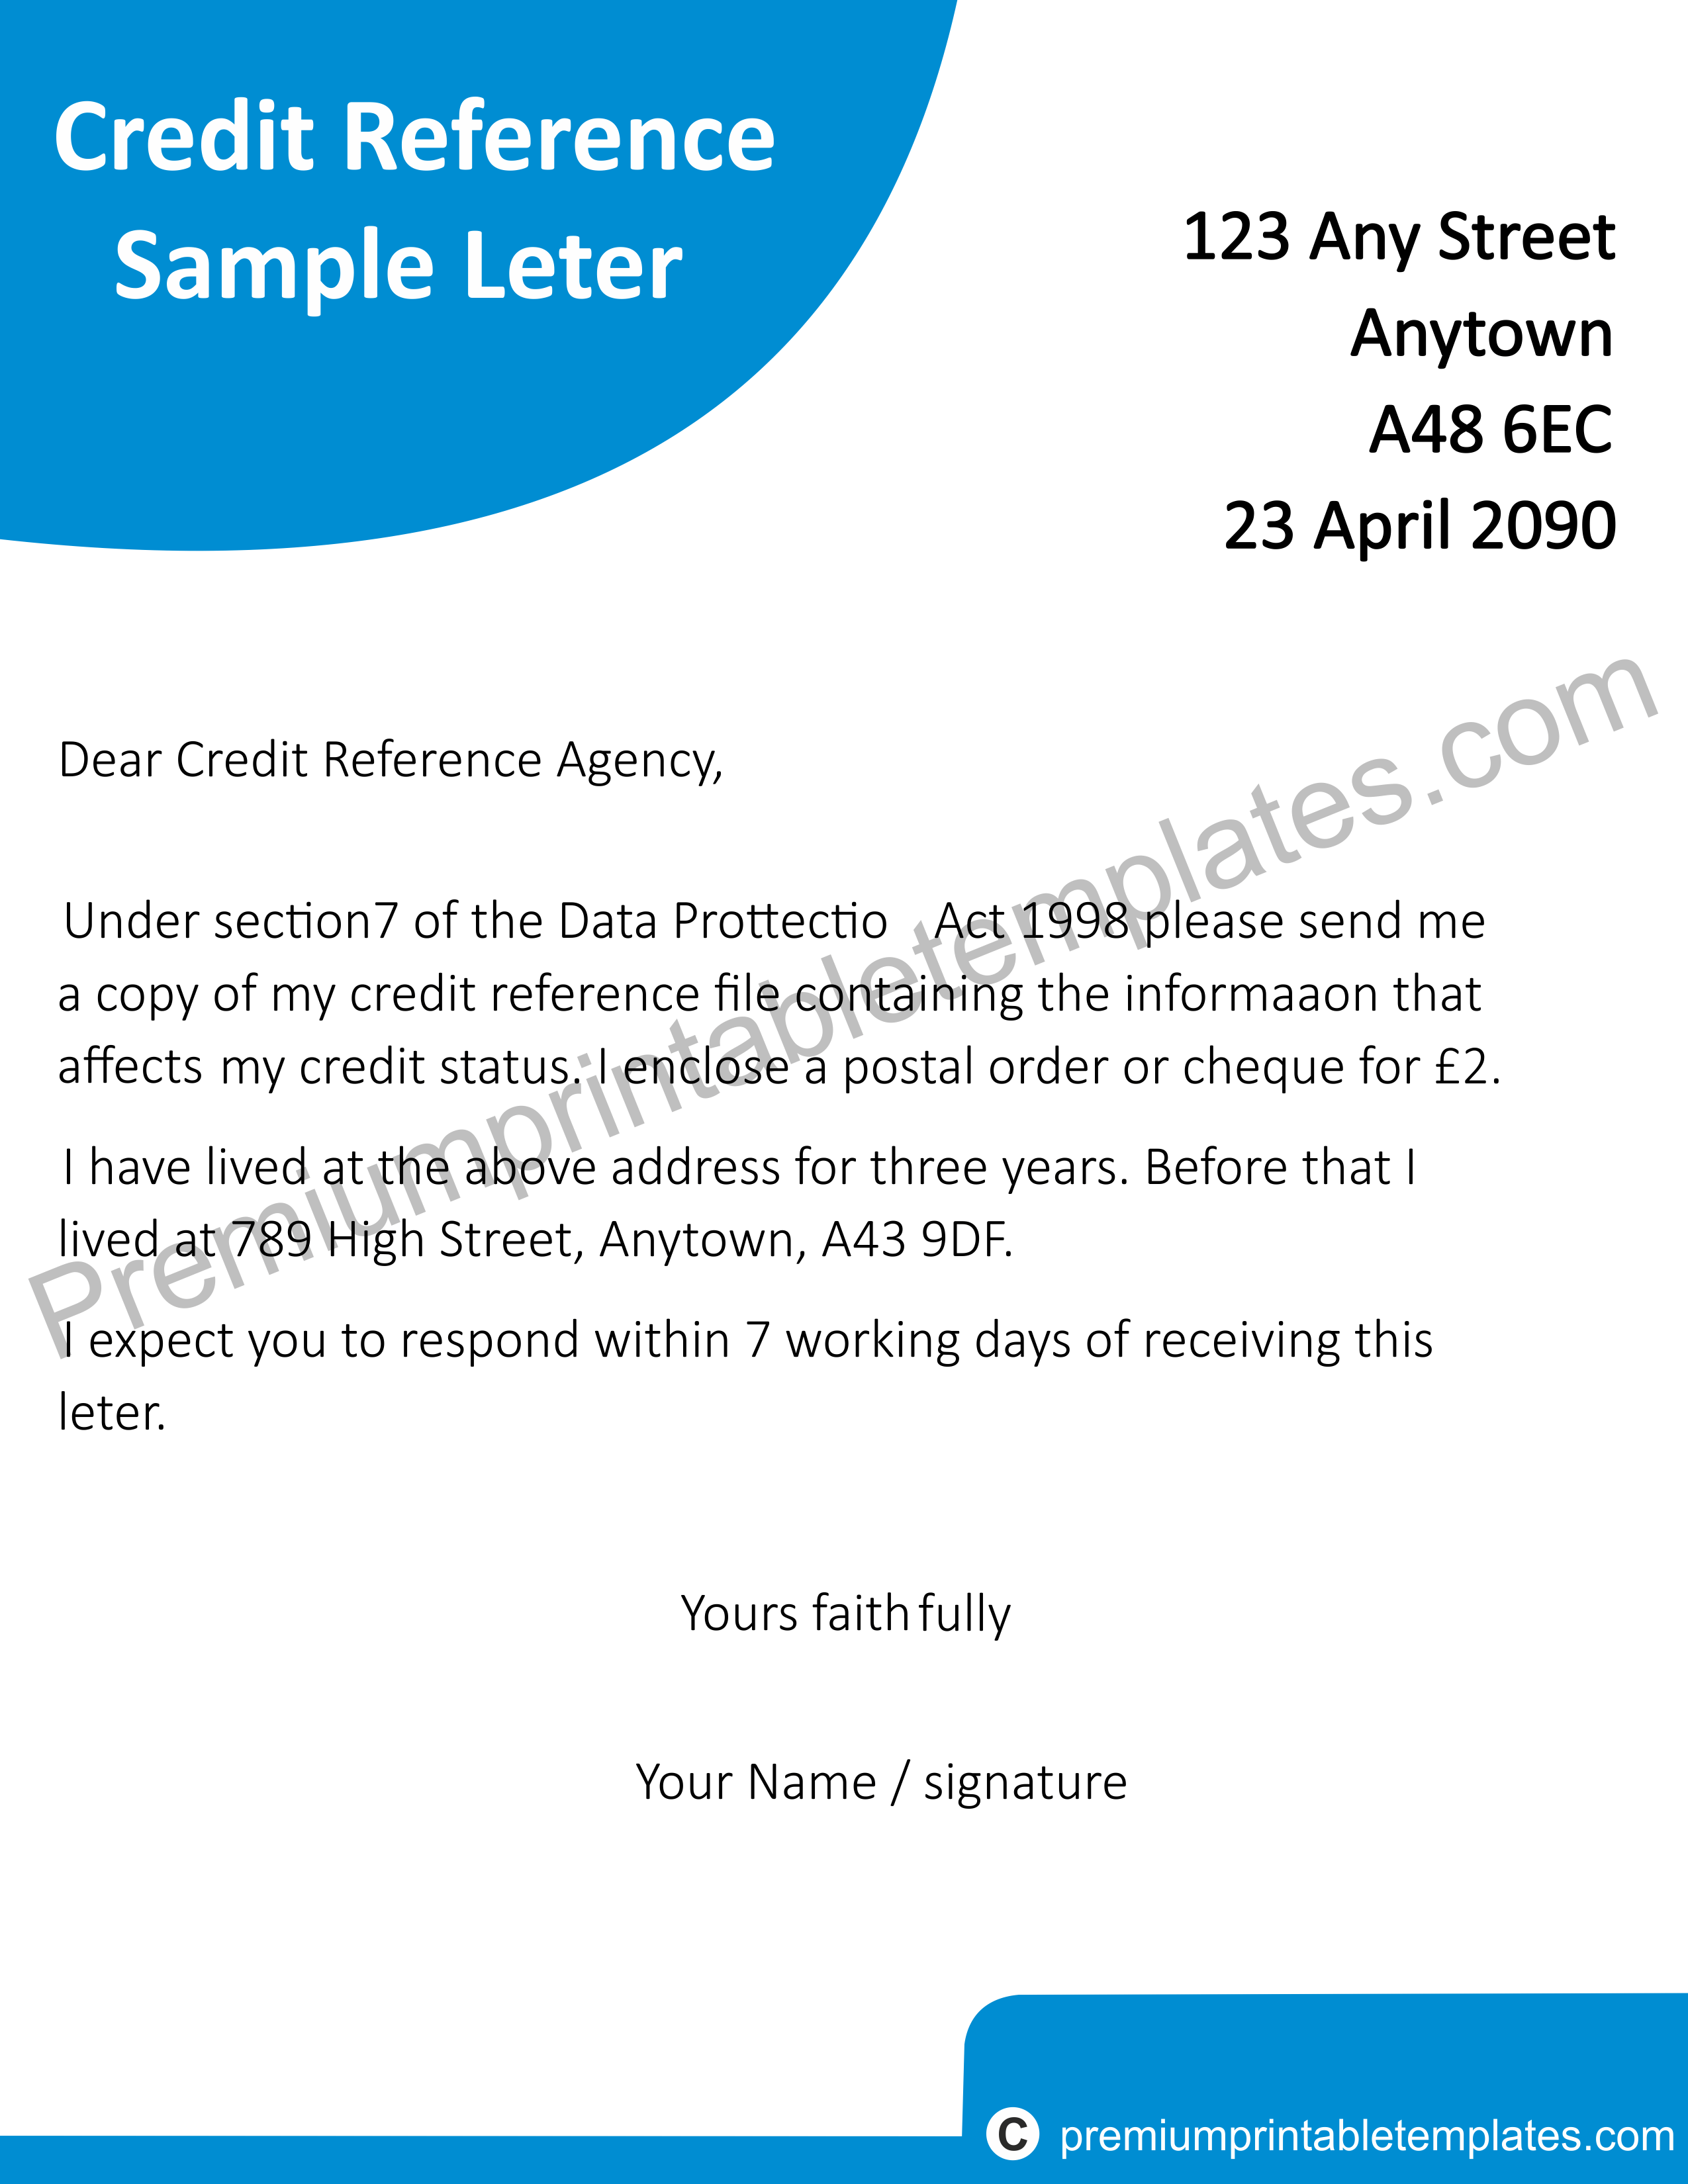 Reference Letter Template from premiumprintabletemplates.com